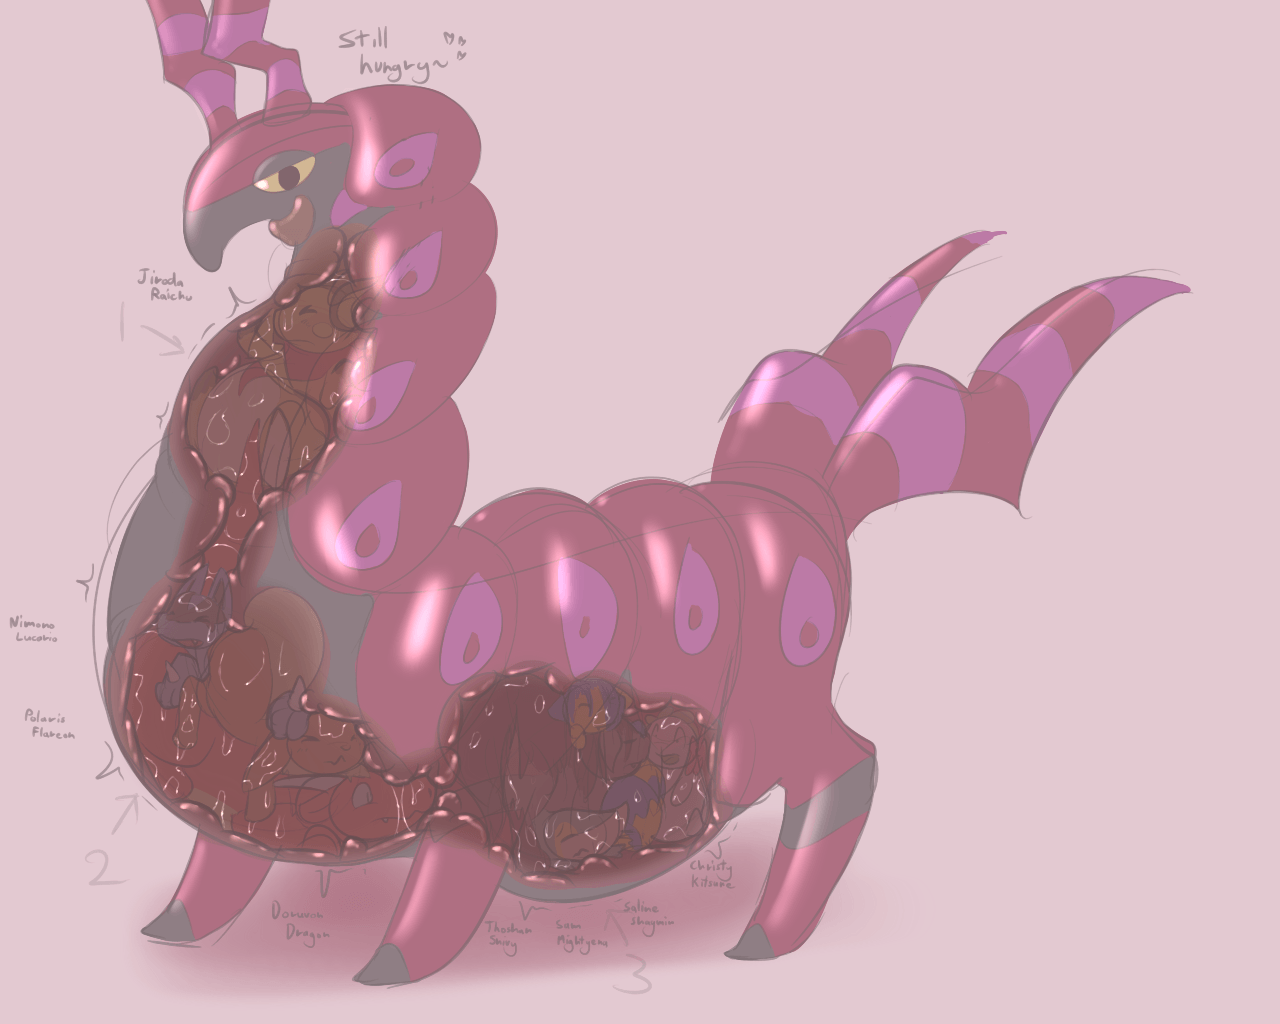 Scolipede is still hungry